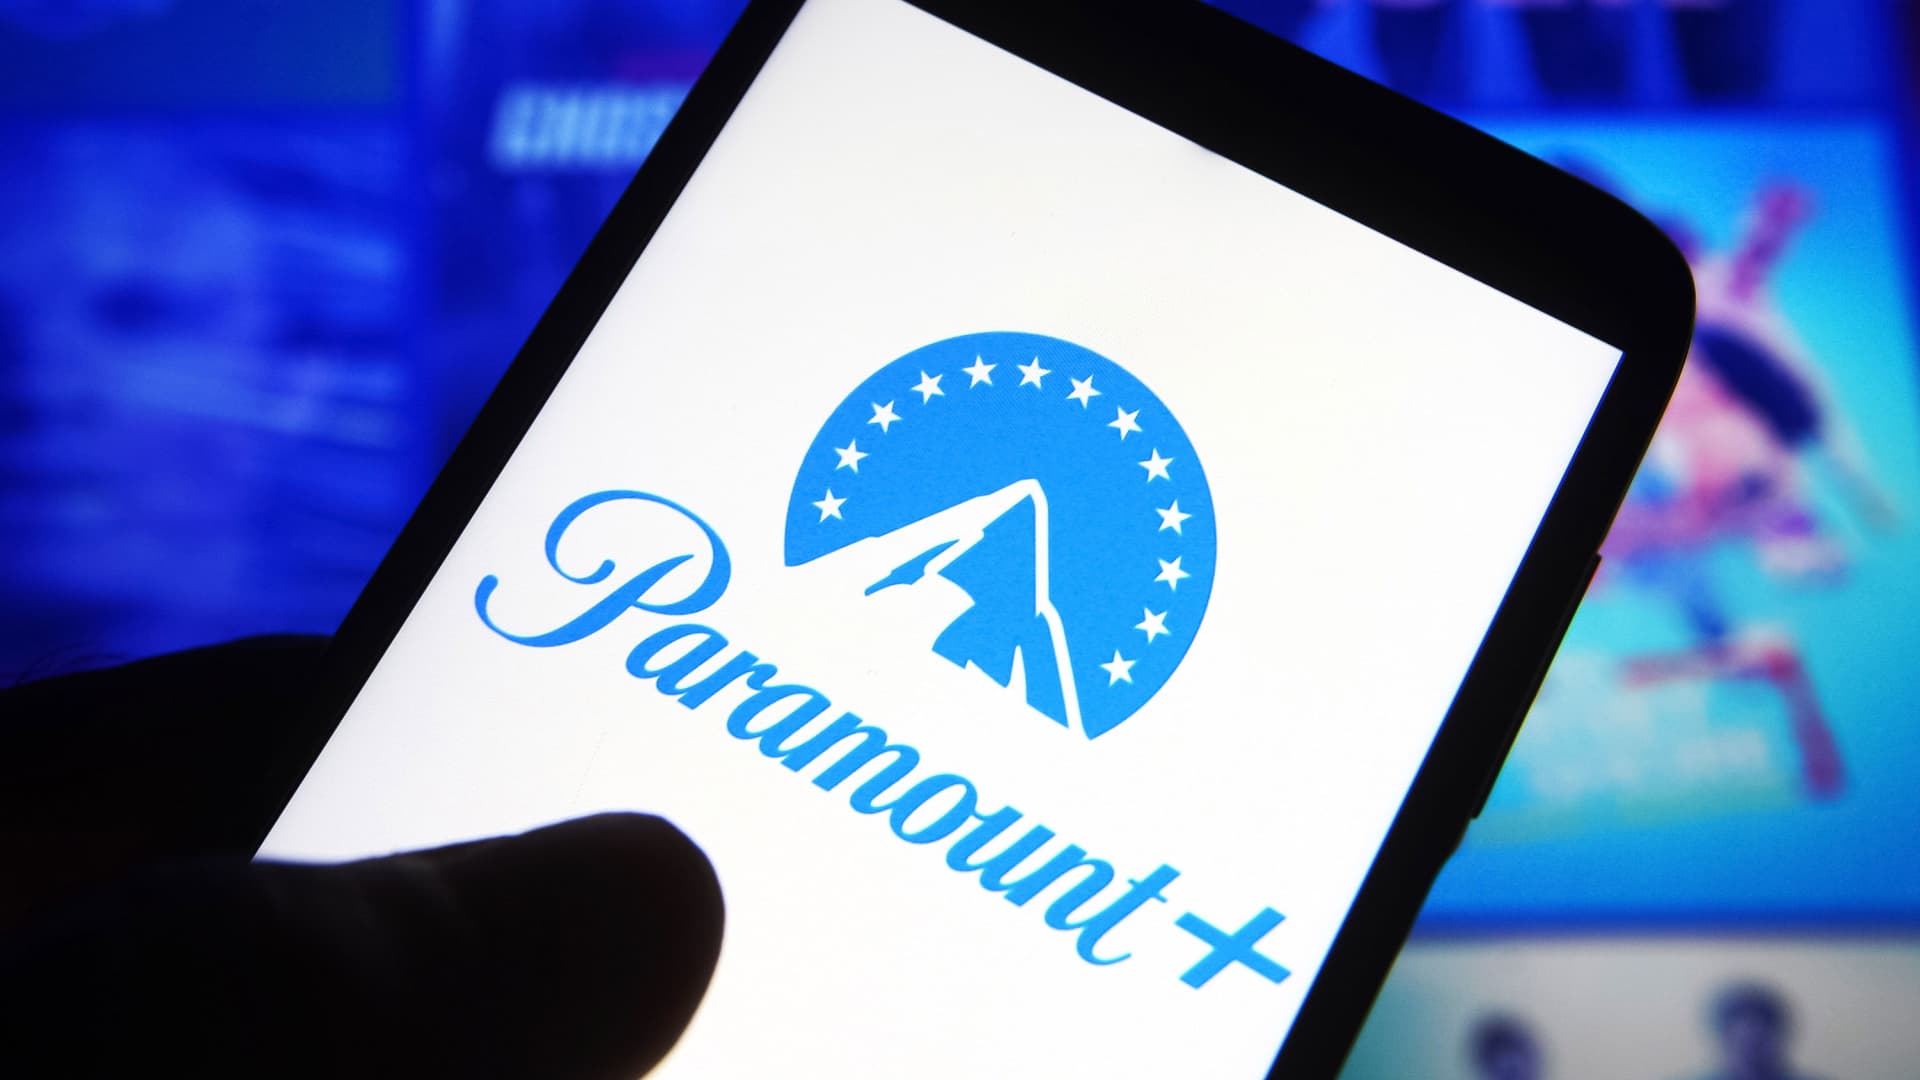 Sell Paramount as streaming competition intensifies, Goldman Sachs says